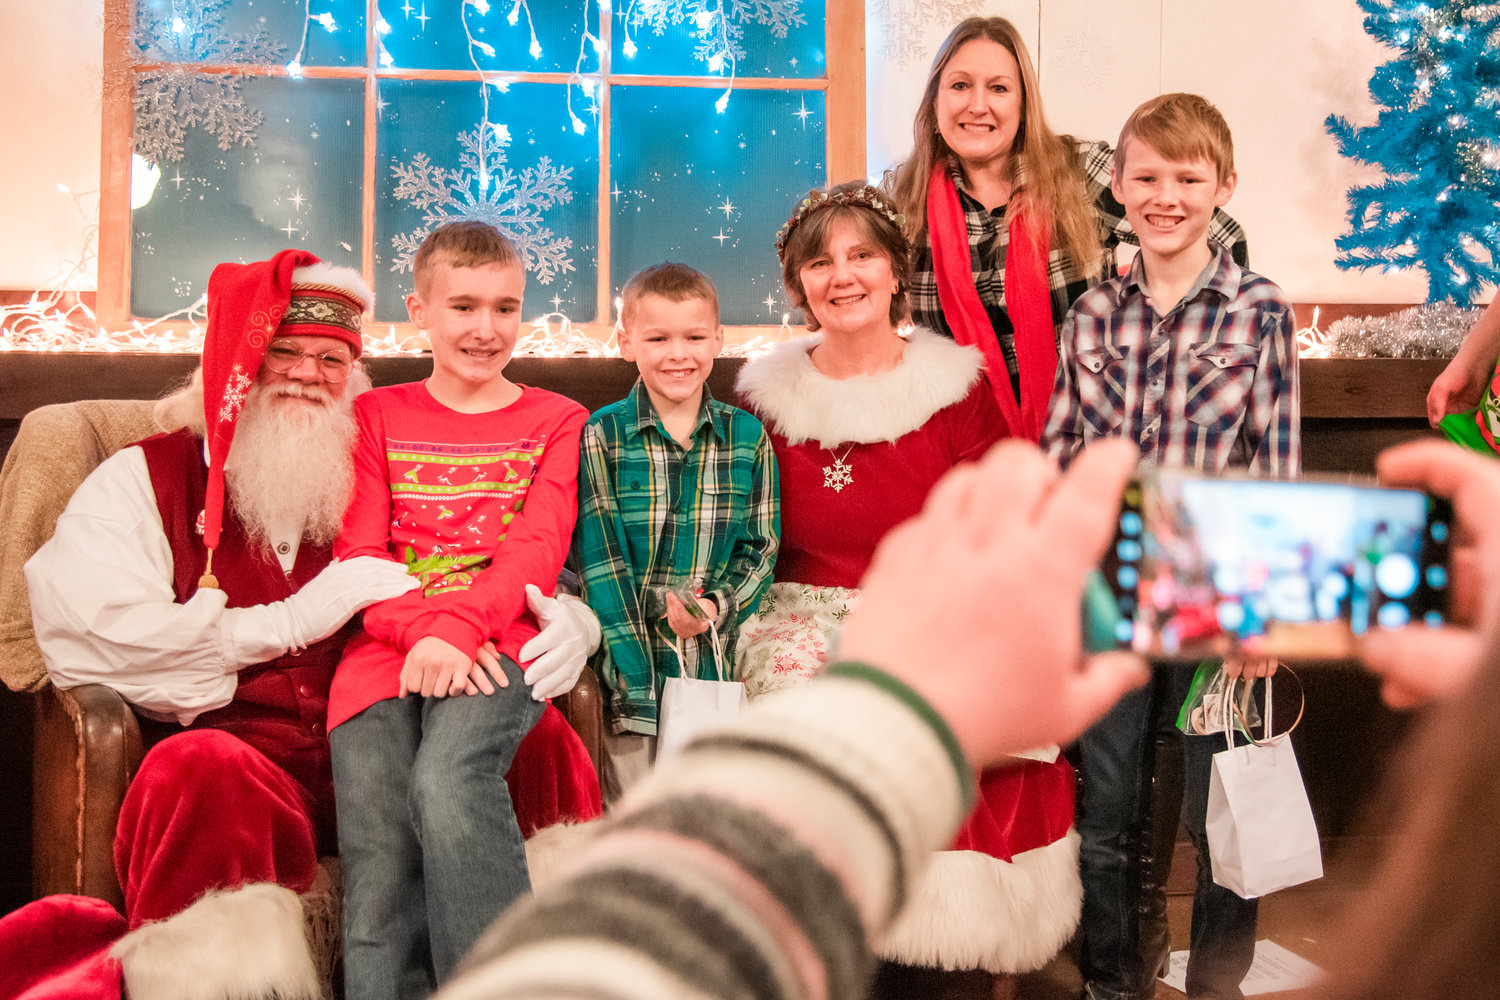 From left to right, Archer, Barrett, Raylan and Leah Freeman smile and pose for a photo with “Santa Tony Christen” and “Mrs. Laurie Claus” at the Newaukum Valley Schoolhouse during a Christmas program Sunday.